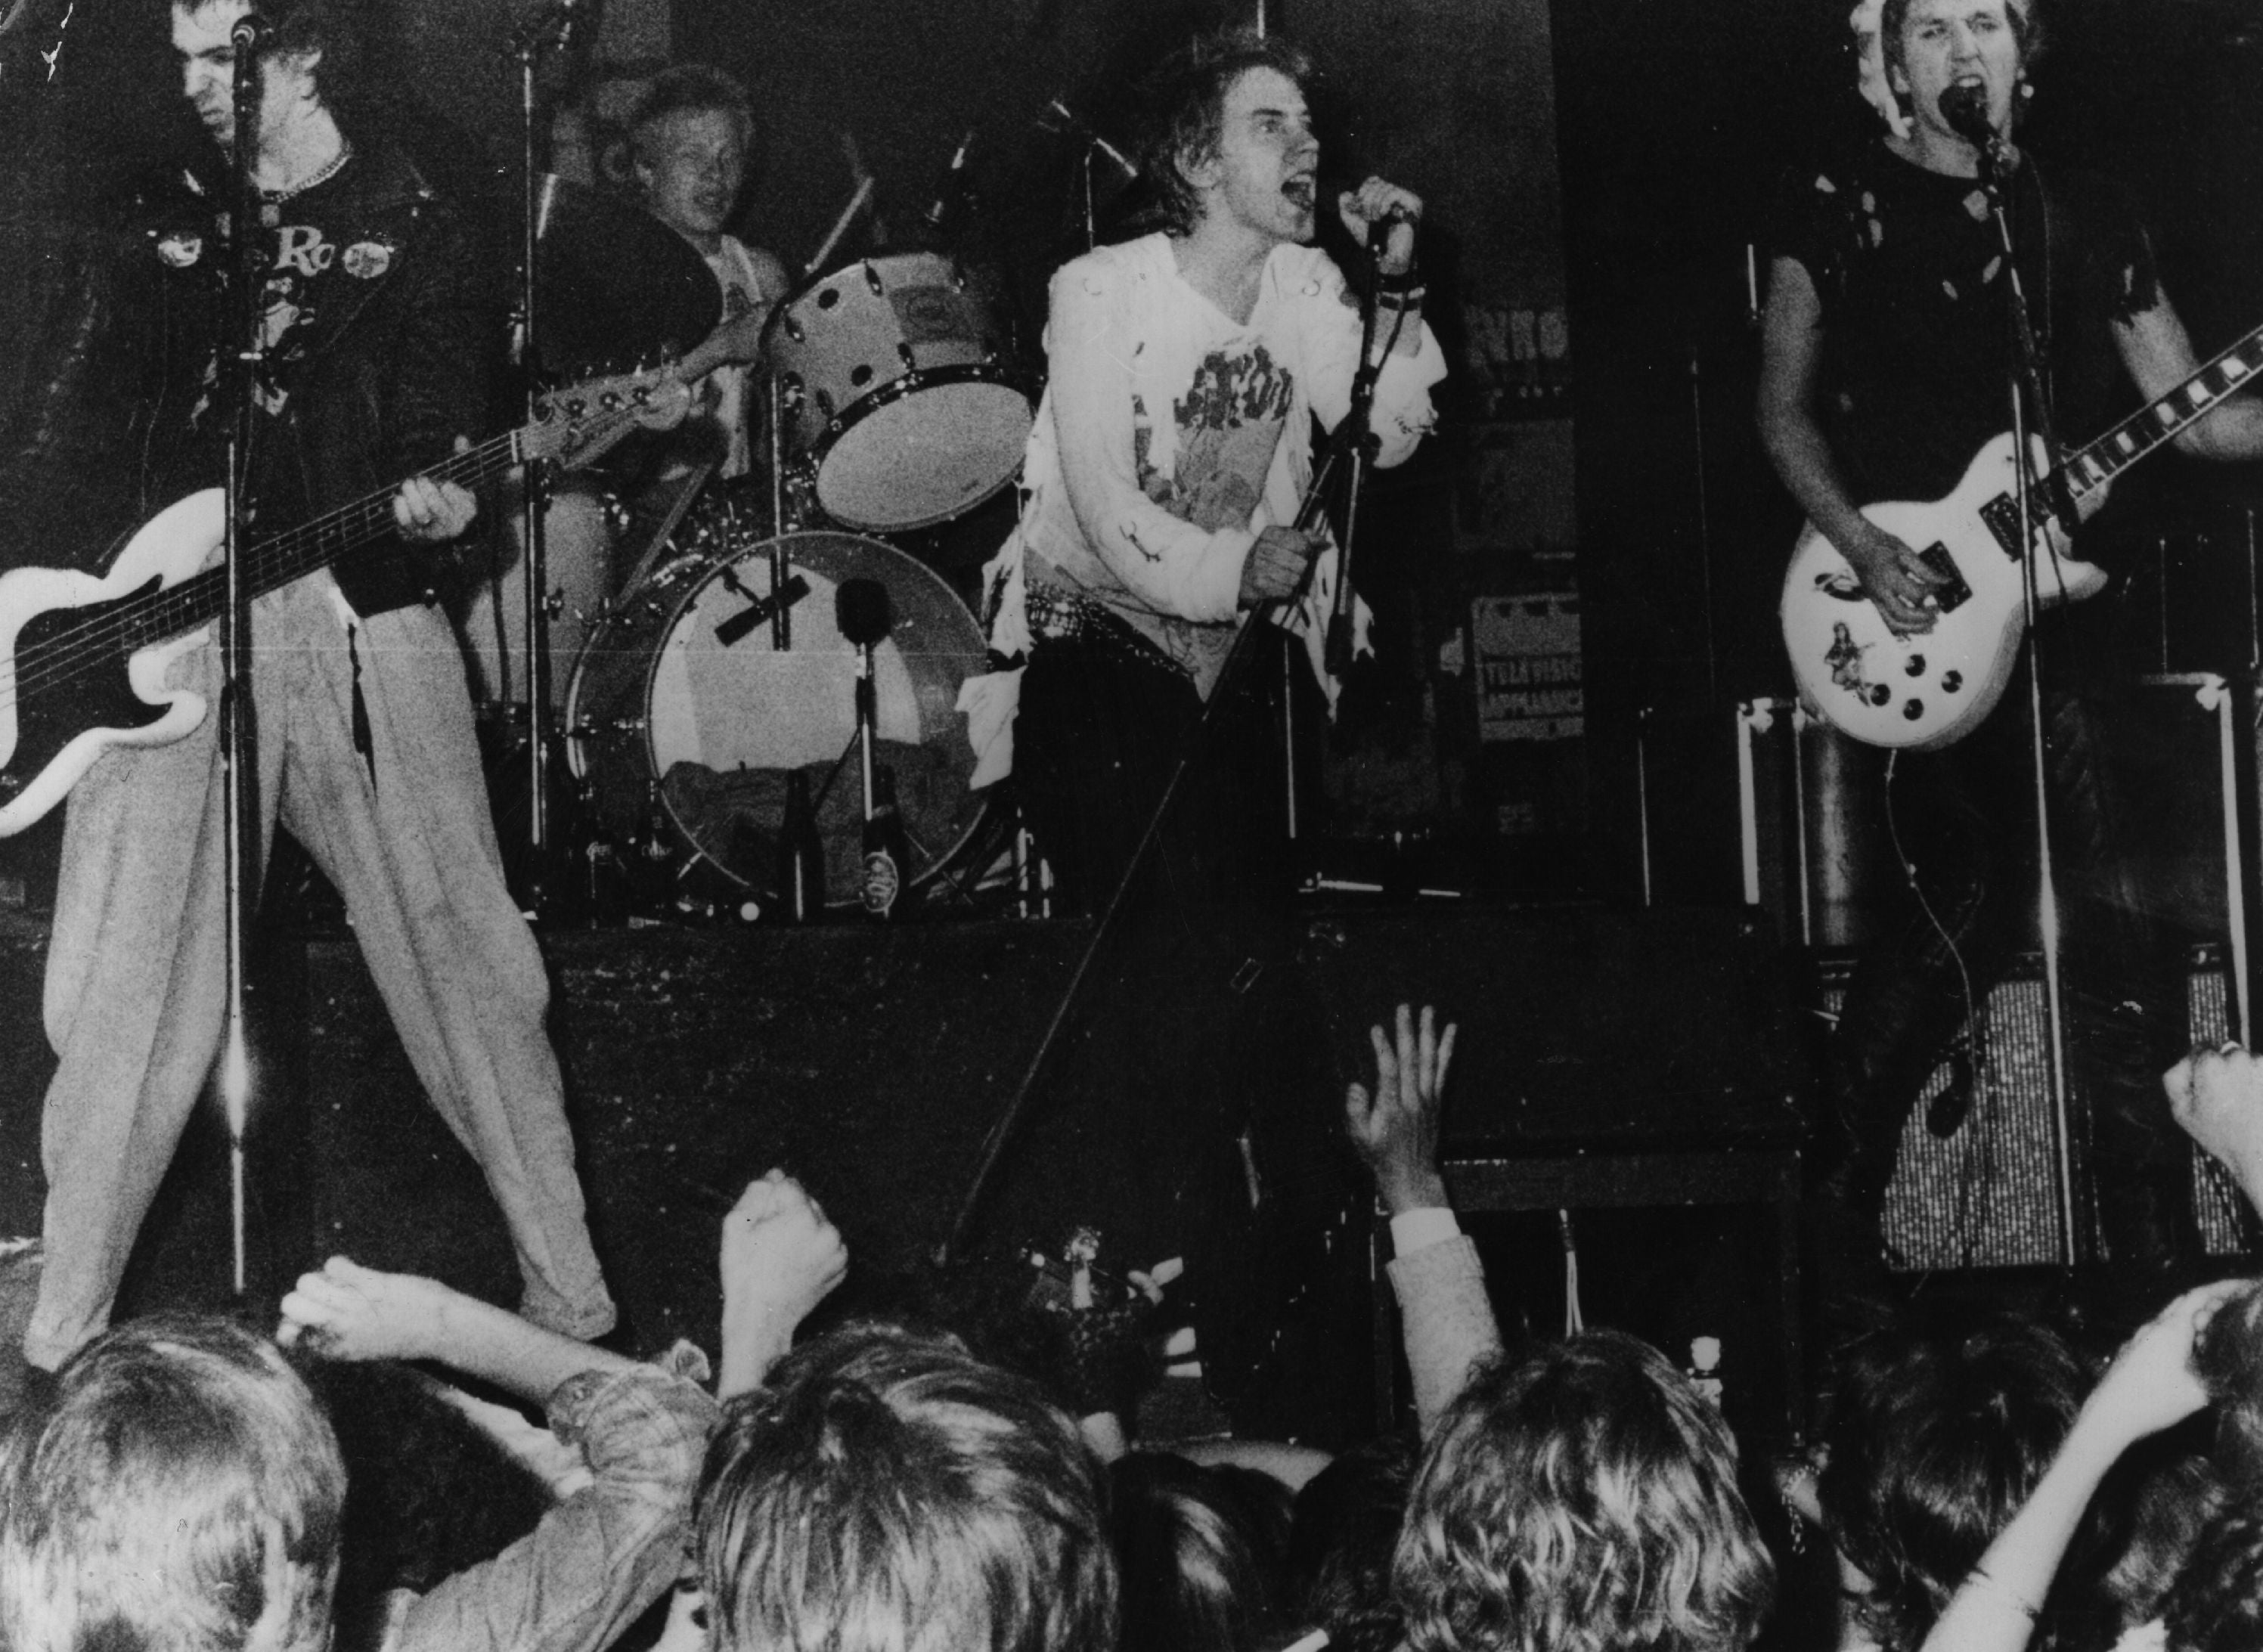 Infamous British punk rock group Sex Pistols playing live in Copenhagen. From left to right: Sid Vicious, Paul Cook, Johnny Rotten and Steve Jones